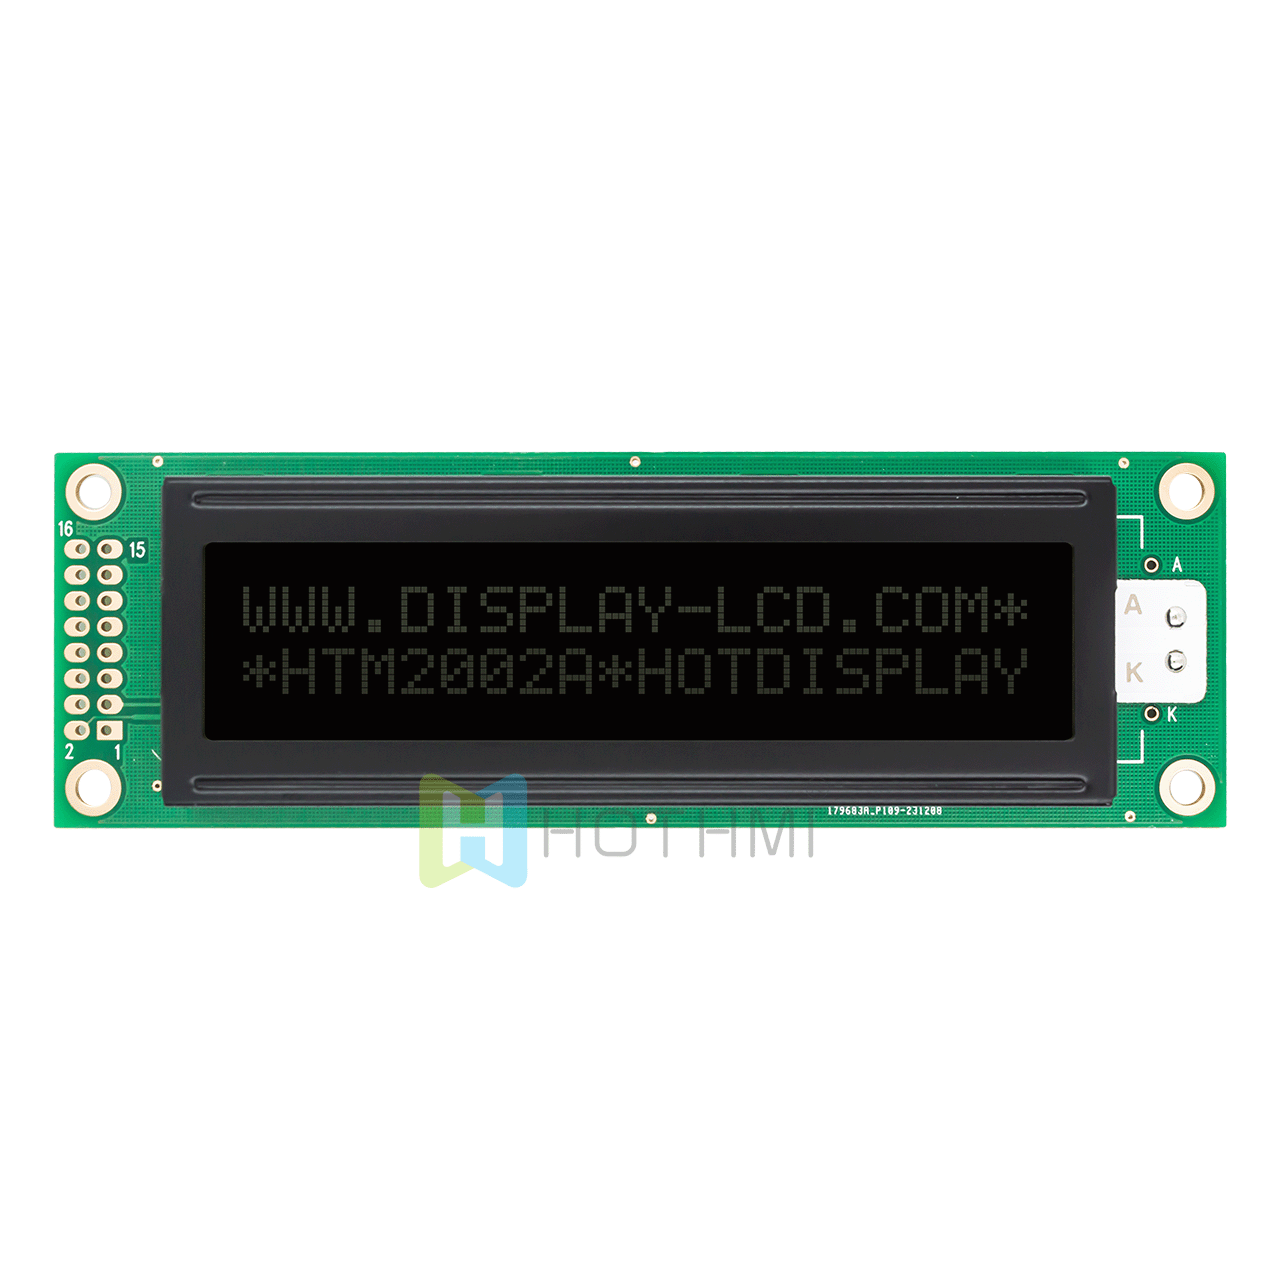 2X20 character monochrome LCD Module | DFSTN-white backlight | white text display on black background | Aruino | 5.0v